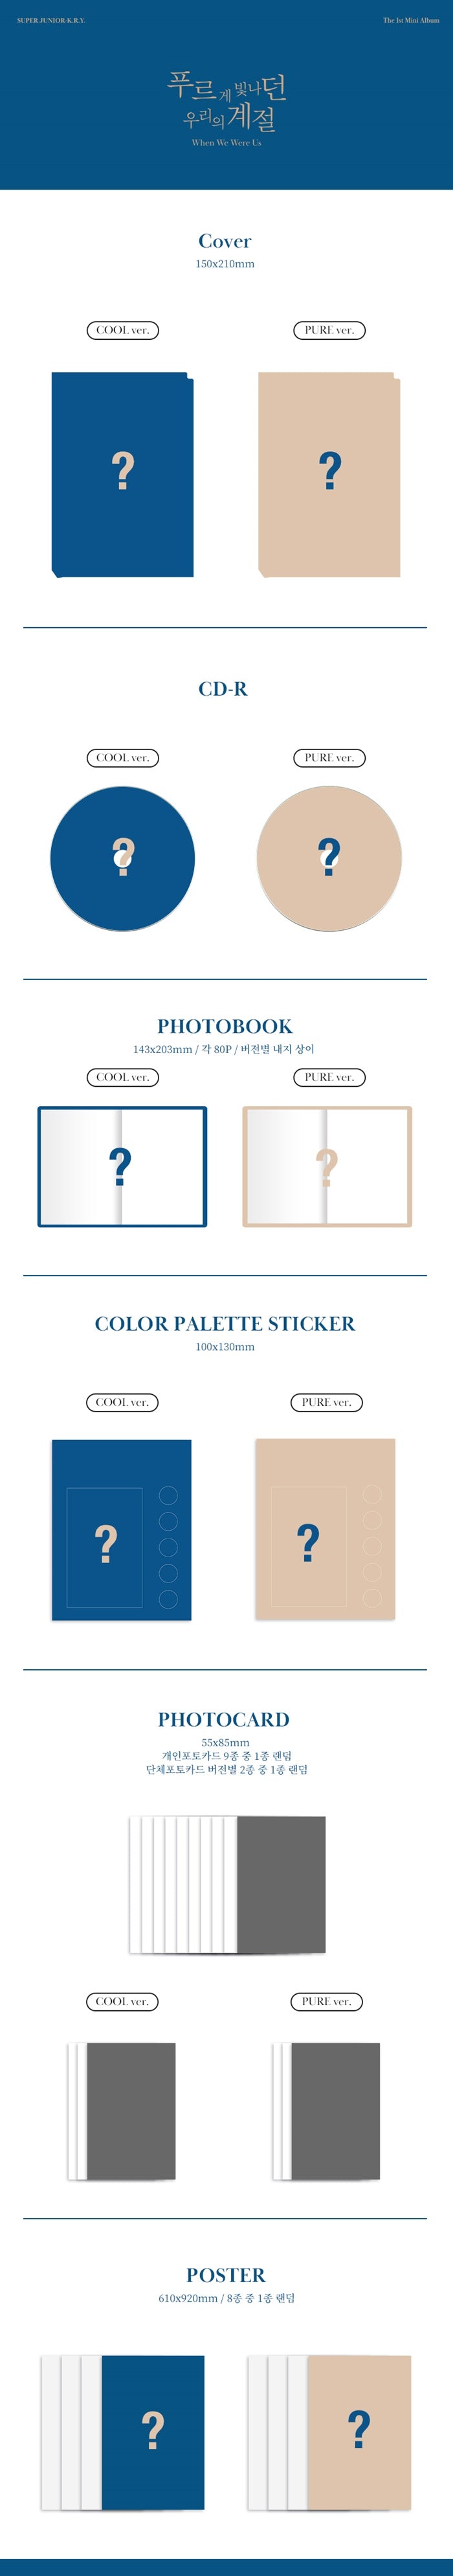 1 CD
1 Photo Book (80 pages)
2 Photo Cards
1 Color Palette Sticker